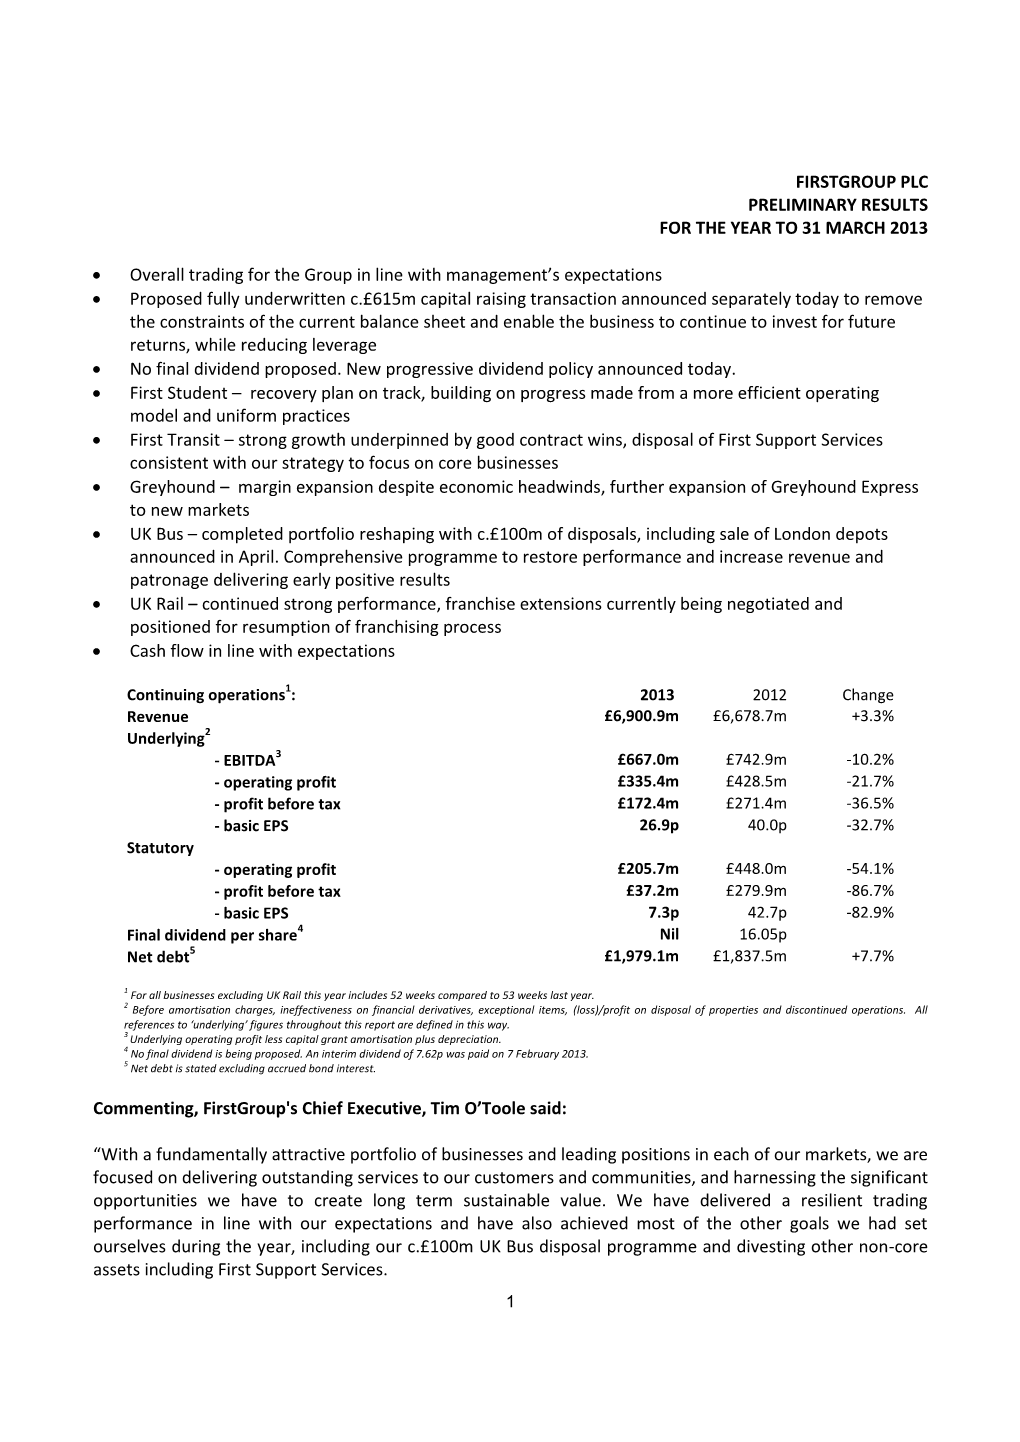 Firstgroup Plc Preliminary Results for the Year to 31 March 2013